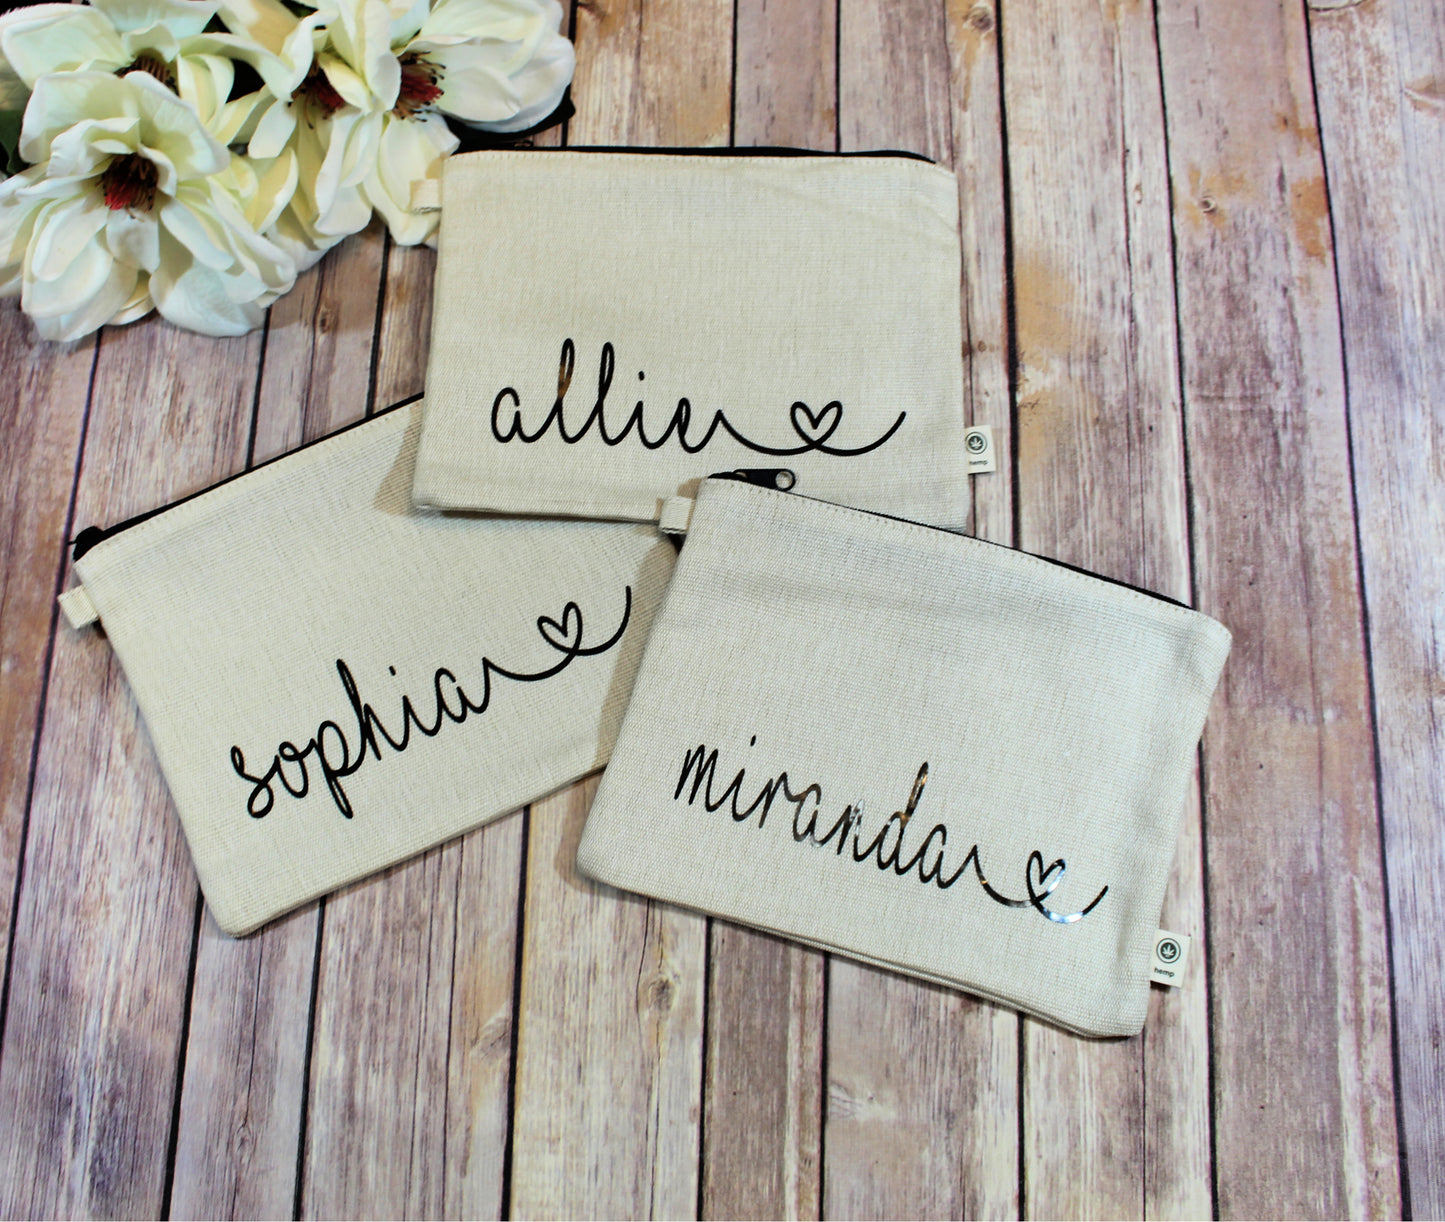 Personalized Hemp Make Up Bag freeshipping - Be Vocal Designs